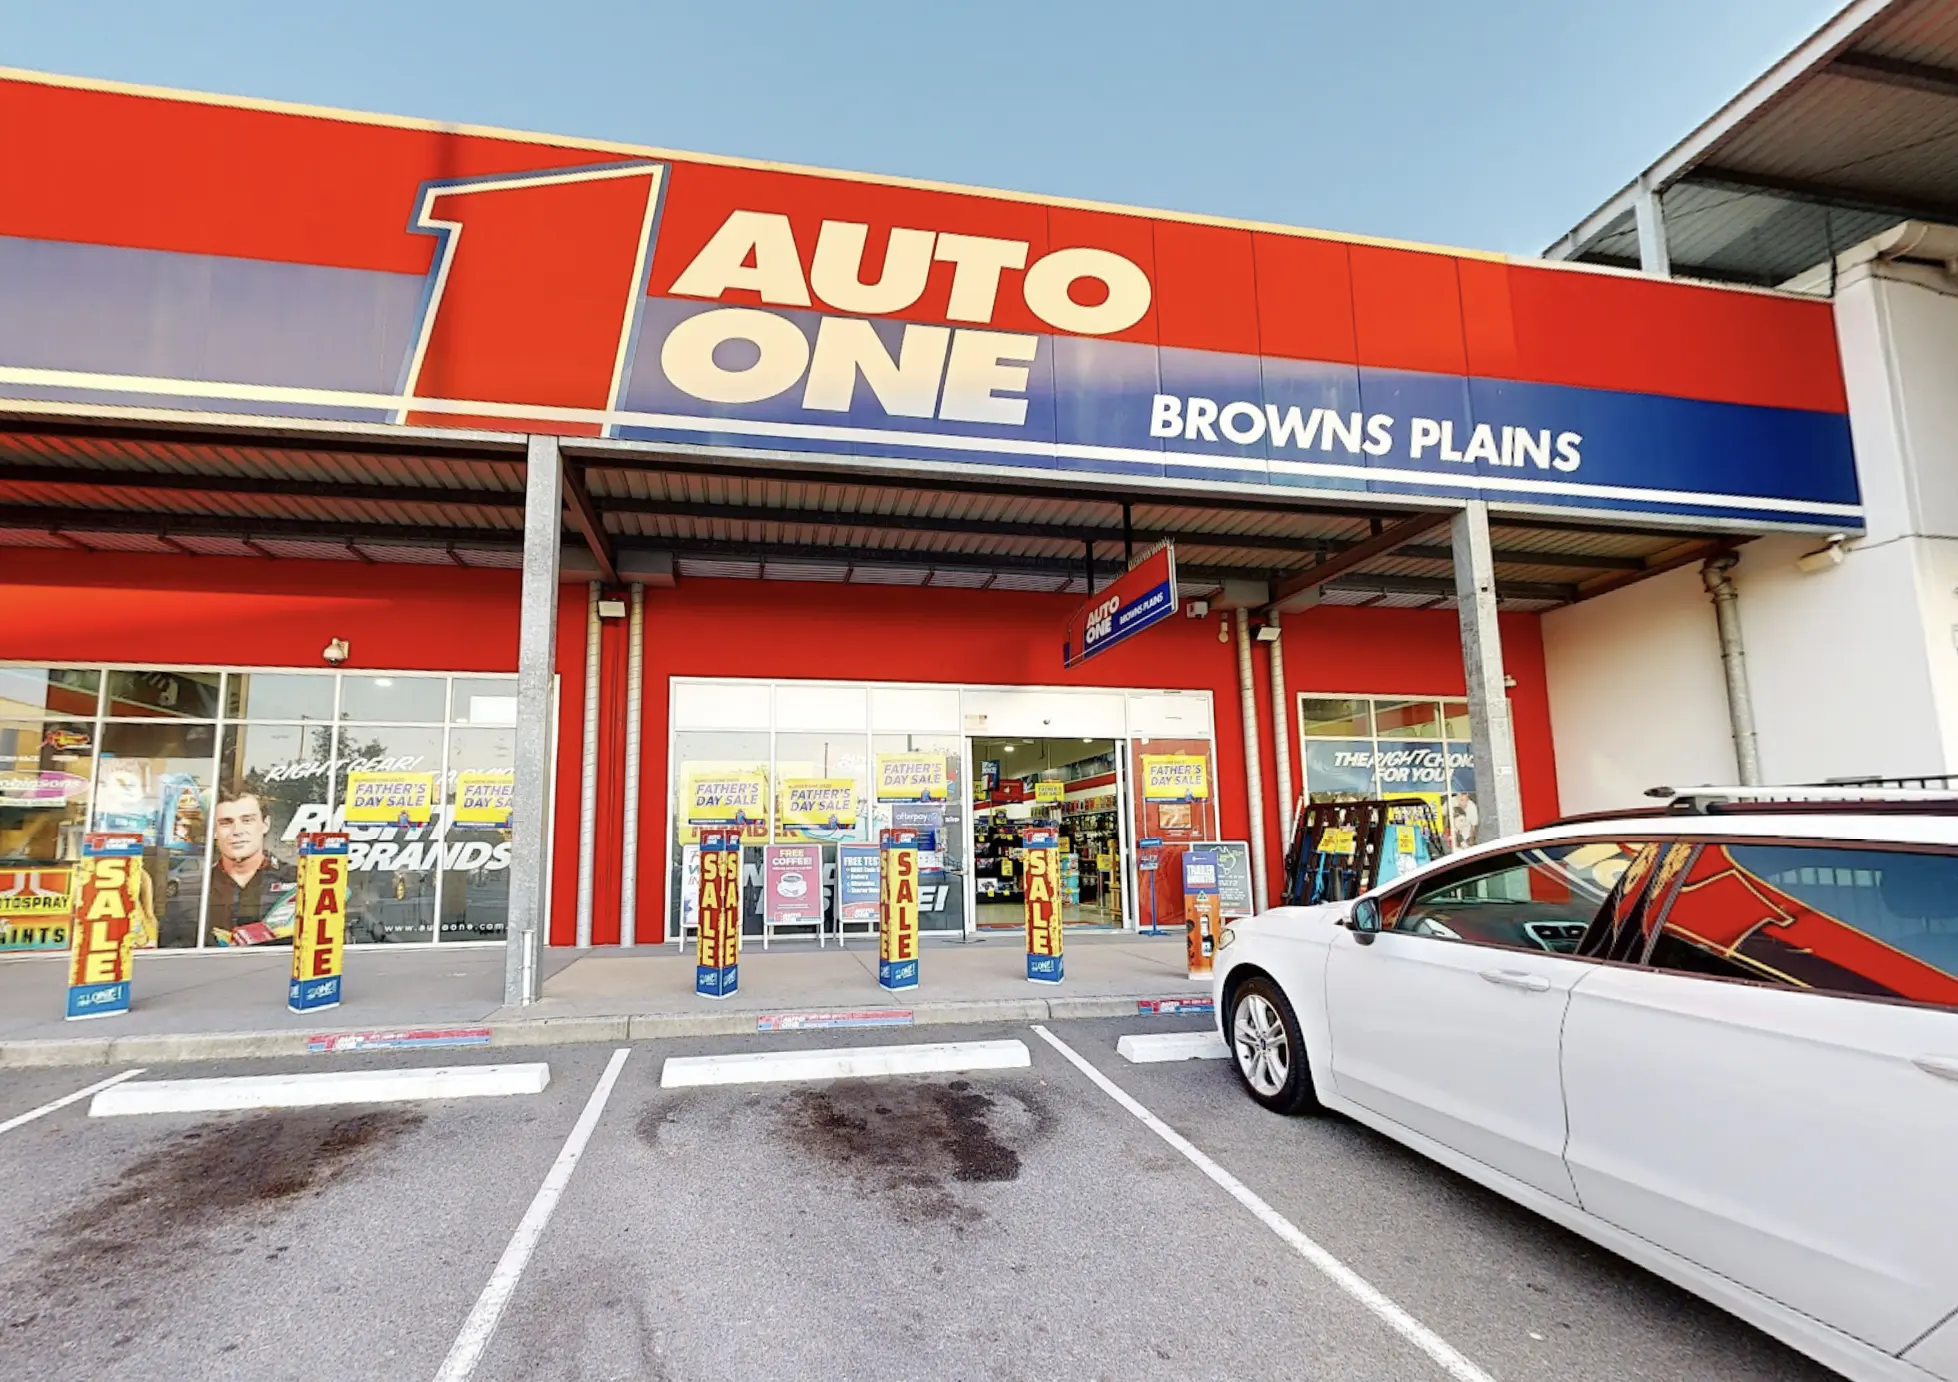 Auto One Browns Plains Store.